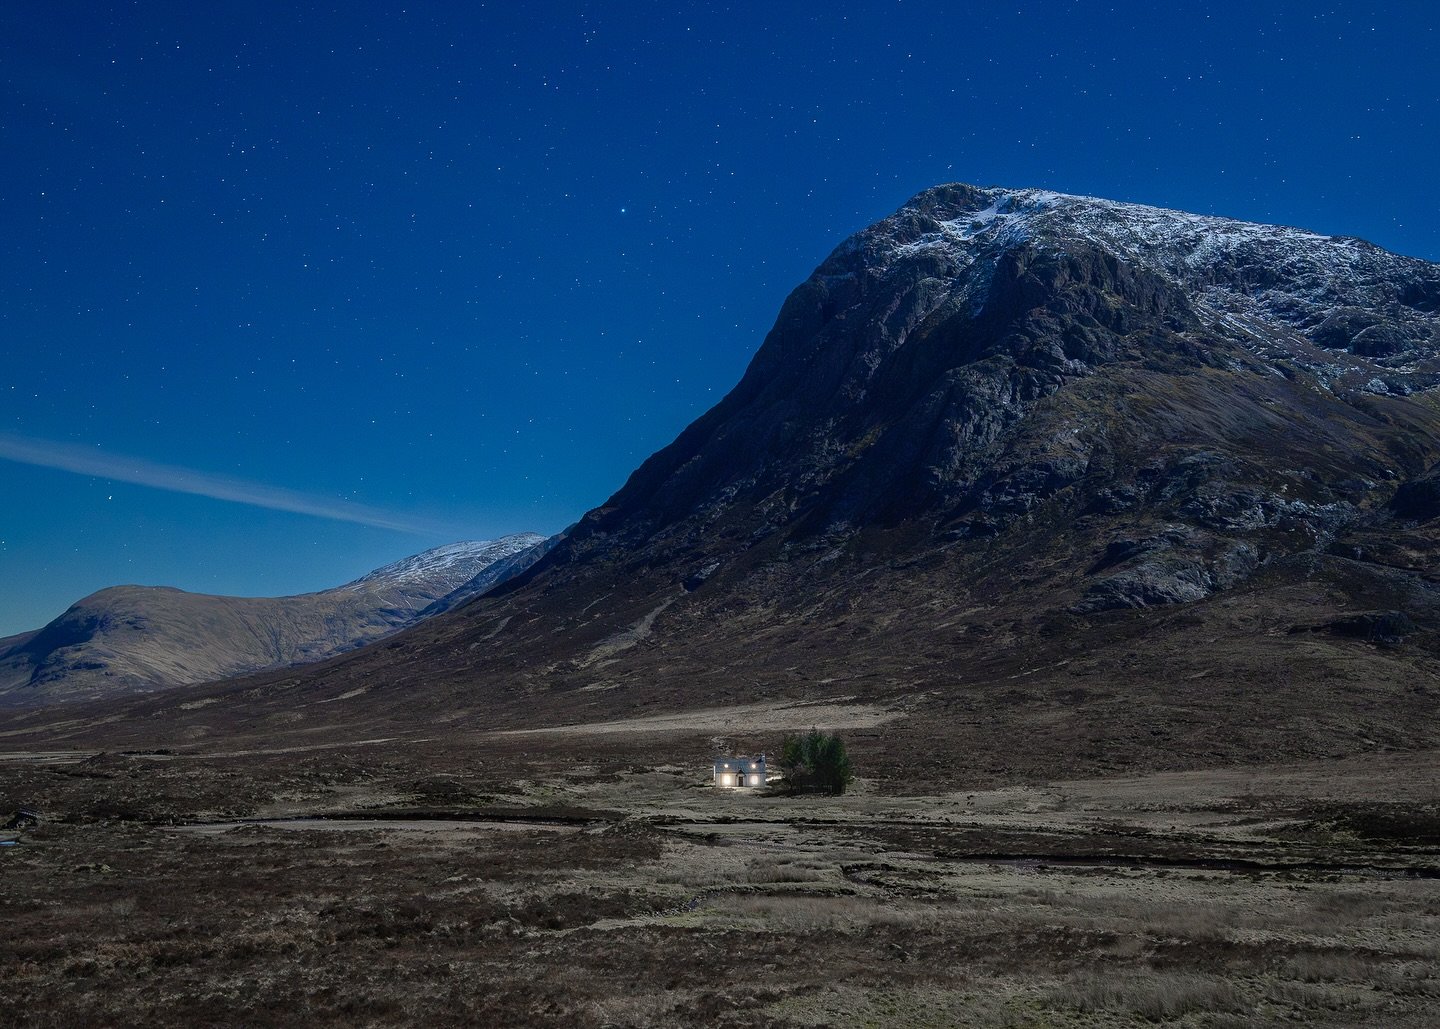 Let&rsquo;s talk about last night! Calm, clear and full of atmosphere.  This is a shot of the Lagangarbh hut, which is situated at the base of Buachaille Etive Mor, was taken at 23:20 after a long and hard climb down from Beinn a&rsquo;Chrulaiste. Ta